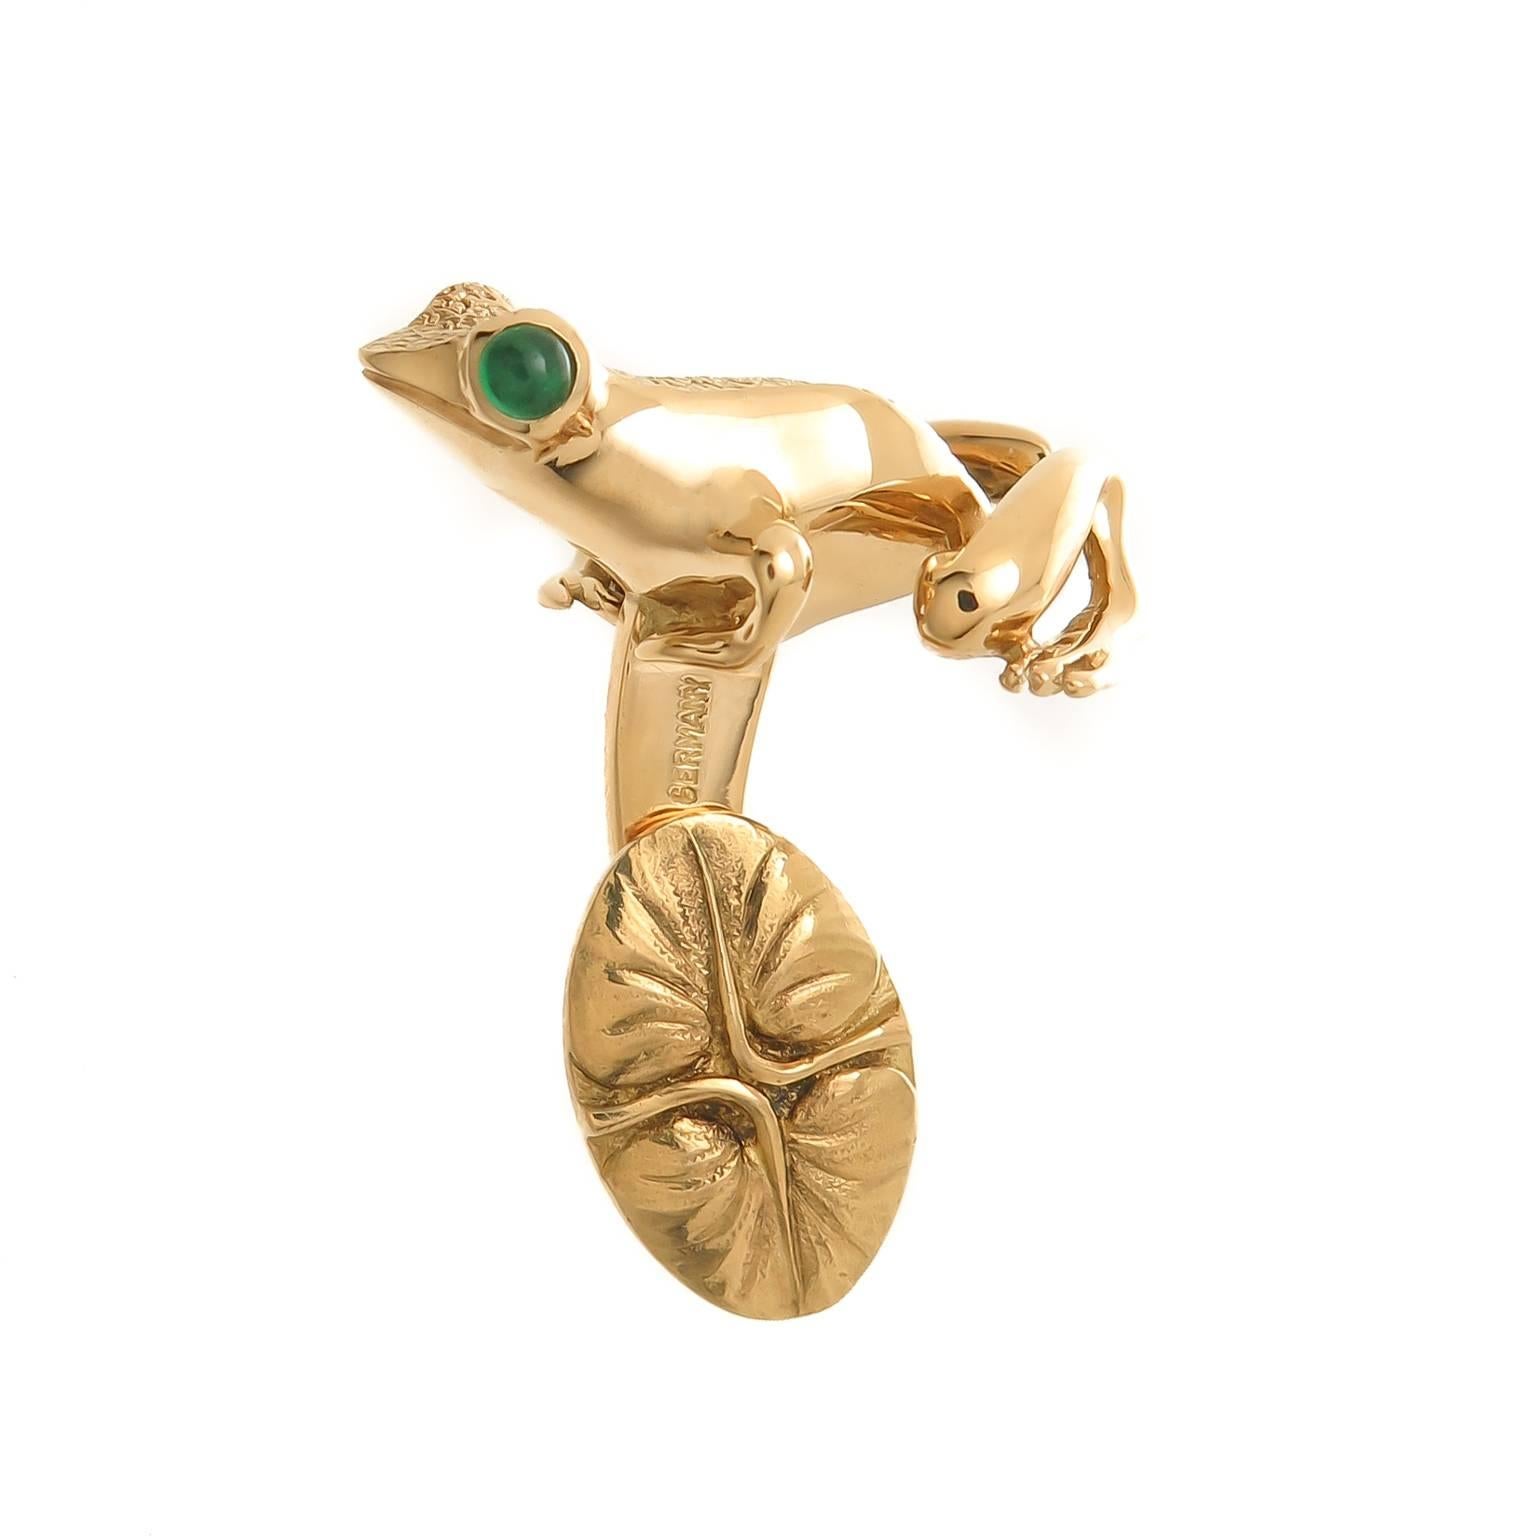 Circa 1990s Tiffany & Company 18K yellow Gold Frog Cuff-links, measuring 1 inch in length and 3/4 inch wide. Set with Cabochon Emerald eyes, nicely detailed with a light texturing. Excellent, unworn condition and in original Tiffany Presentation box.